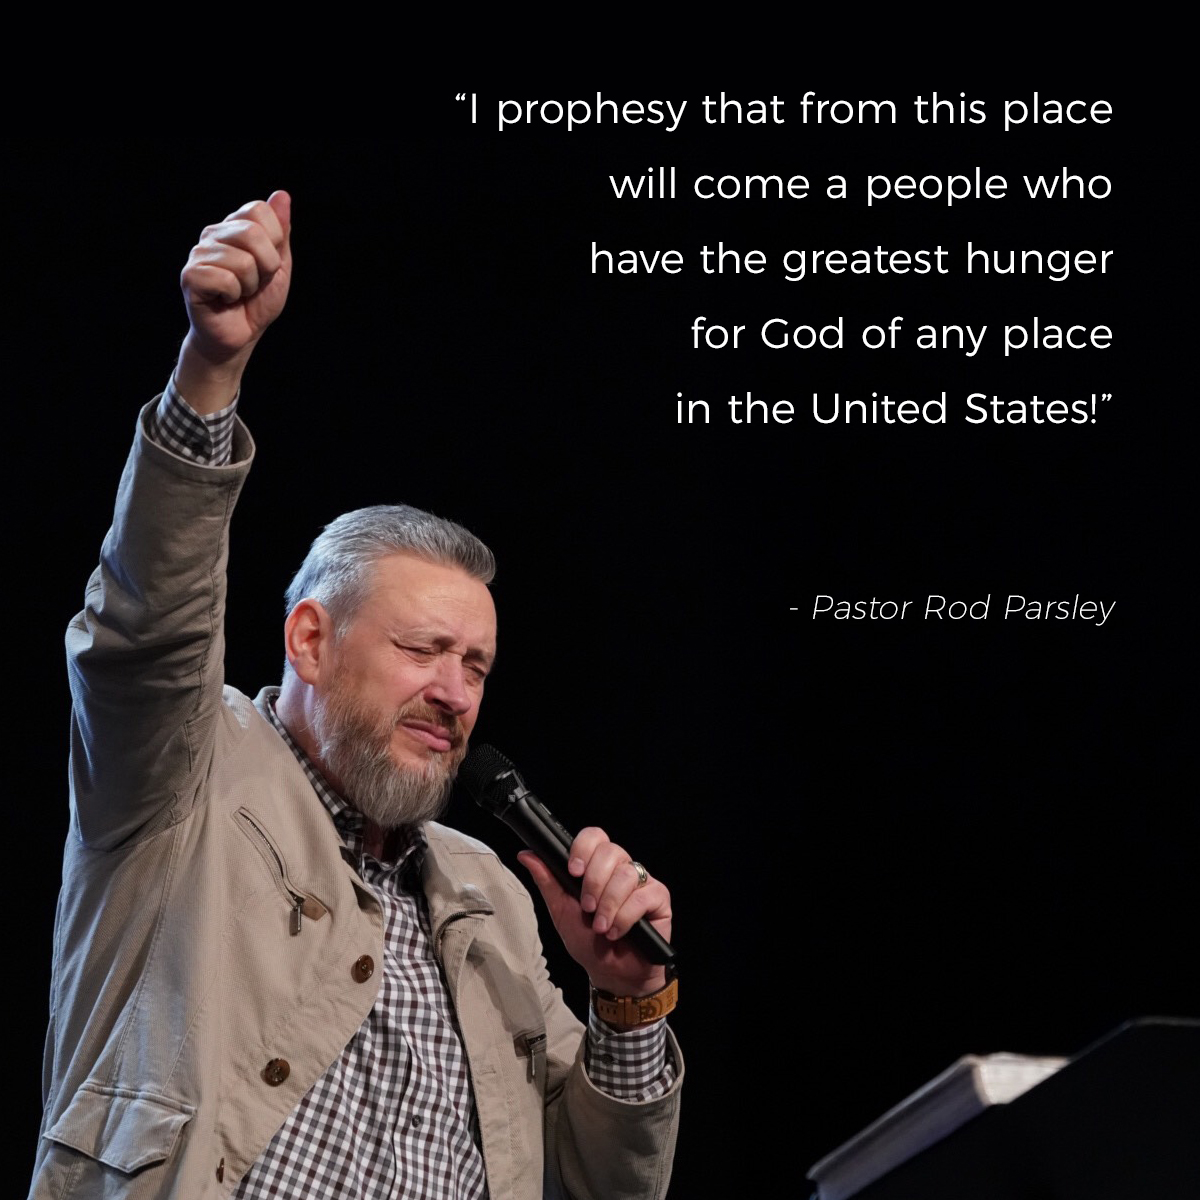 “I prophesy that from this place will come a people who have the greatest hunger for God of any place in the United States!” – Pastor Rod Parsley